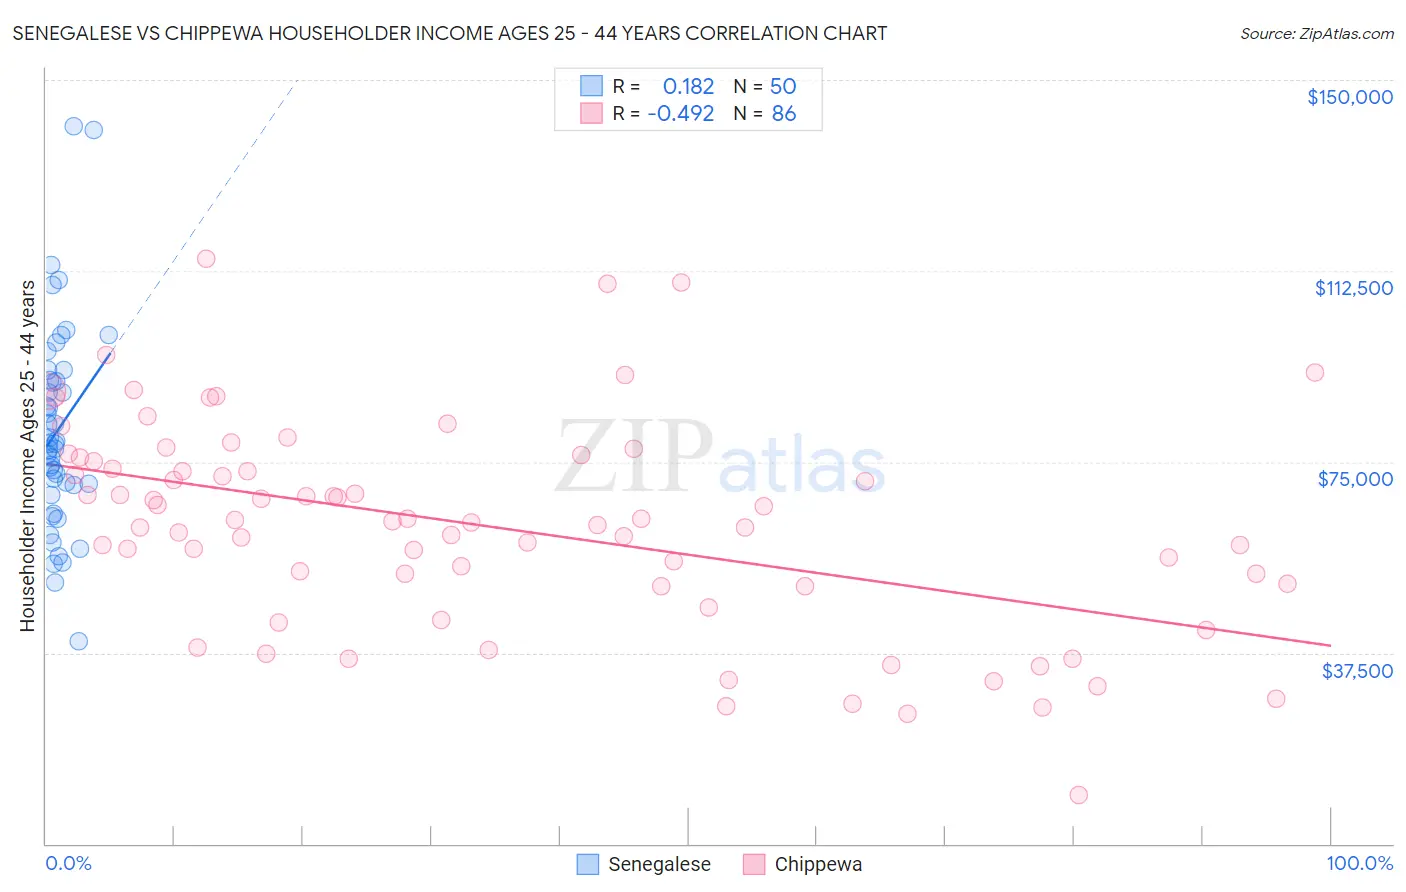 Senegalese vs Chippewa Householder Income Ages 25 - 44 years